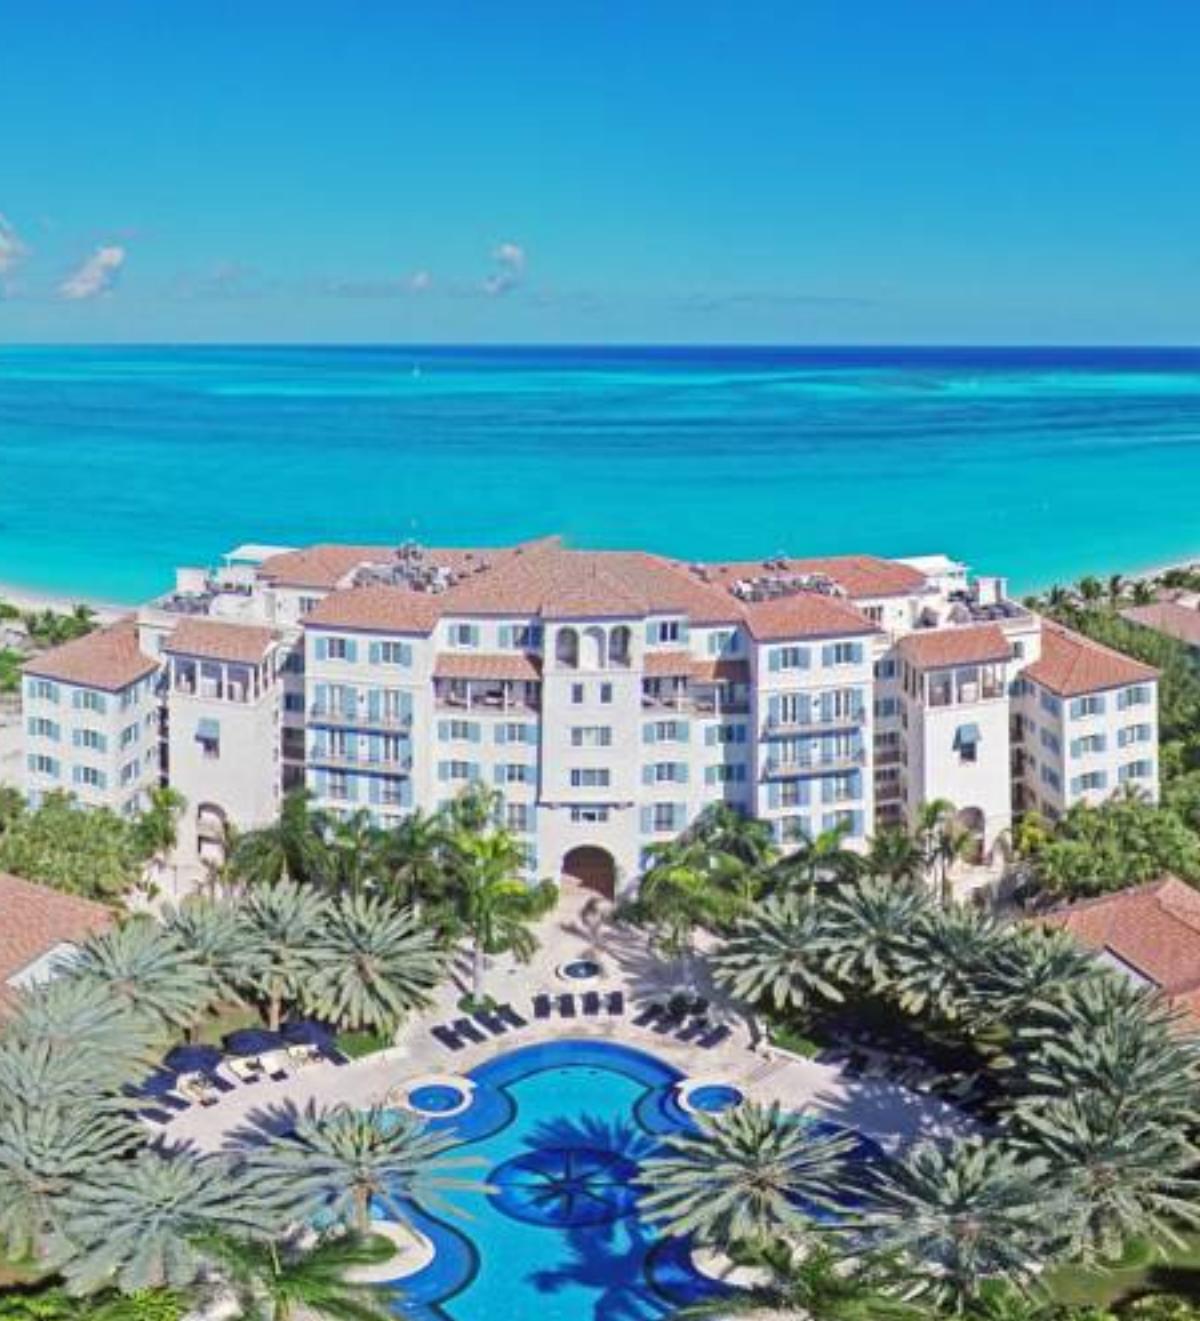 The Regent Grand Hotel Grace Bay Turks and Caicos Islands